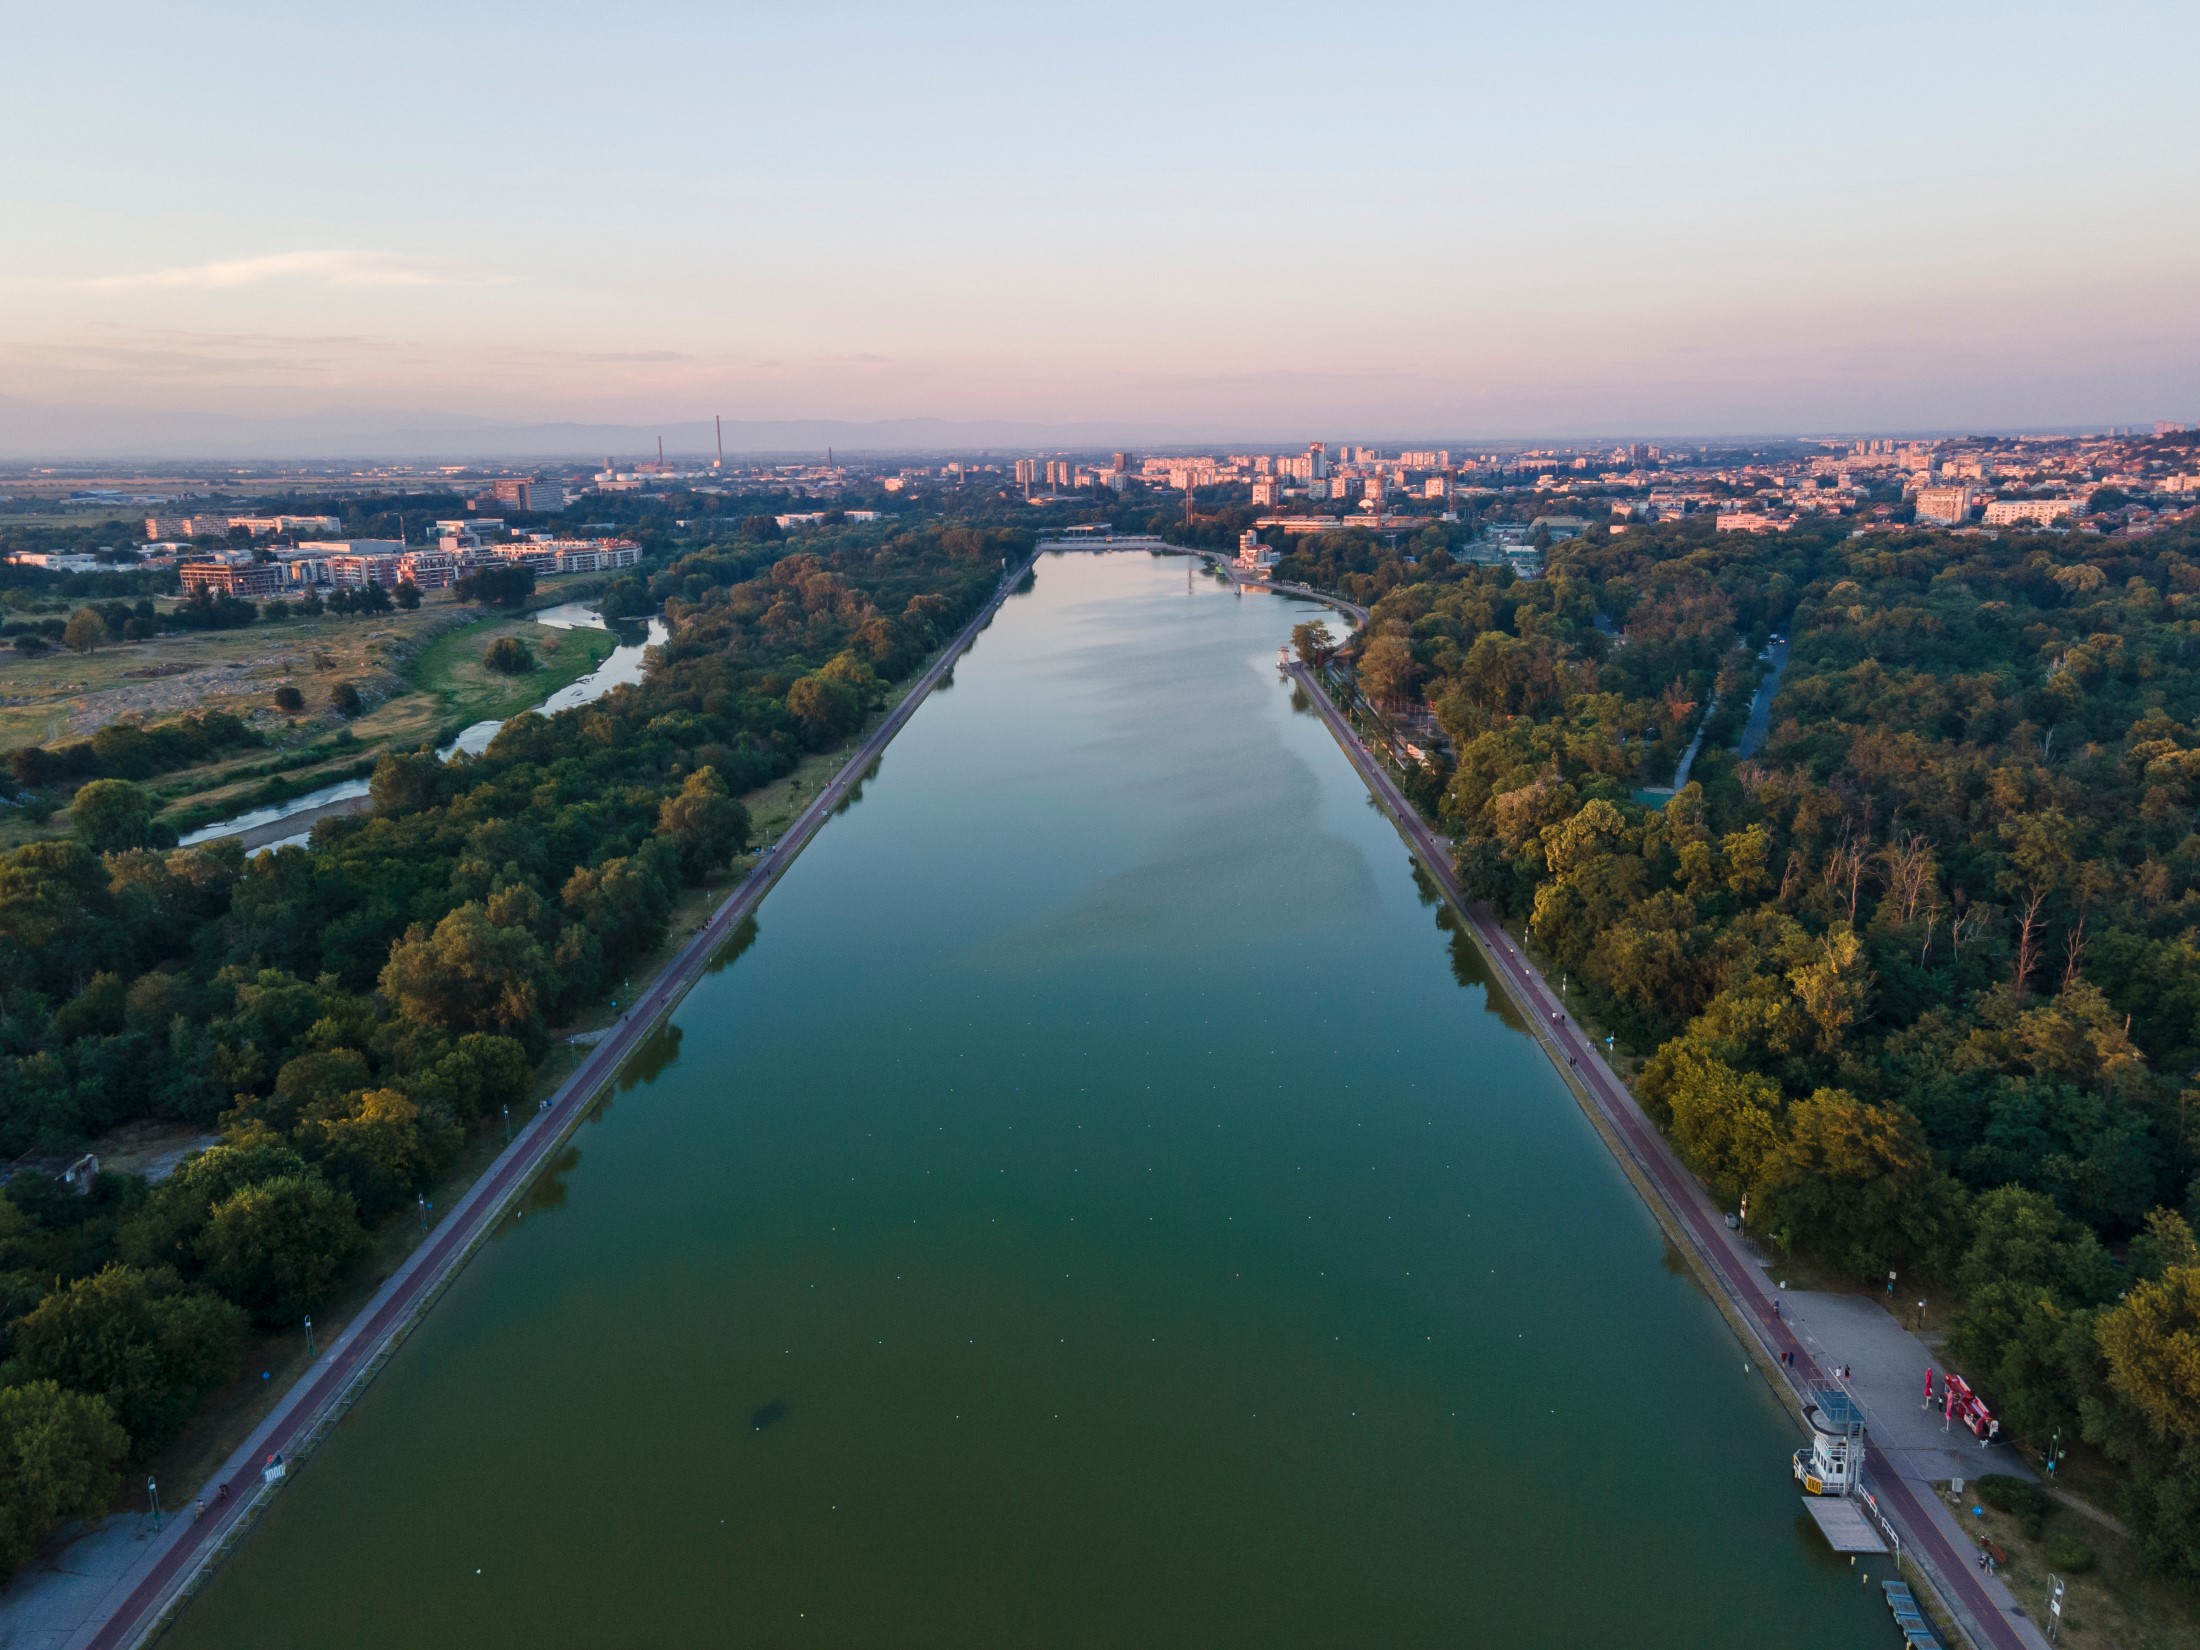 Aerial sunset view of Rowing Venue in city of Plovdiv, Bulgaria